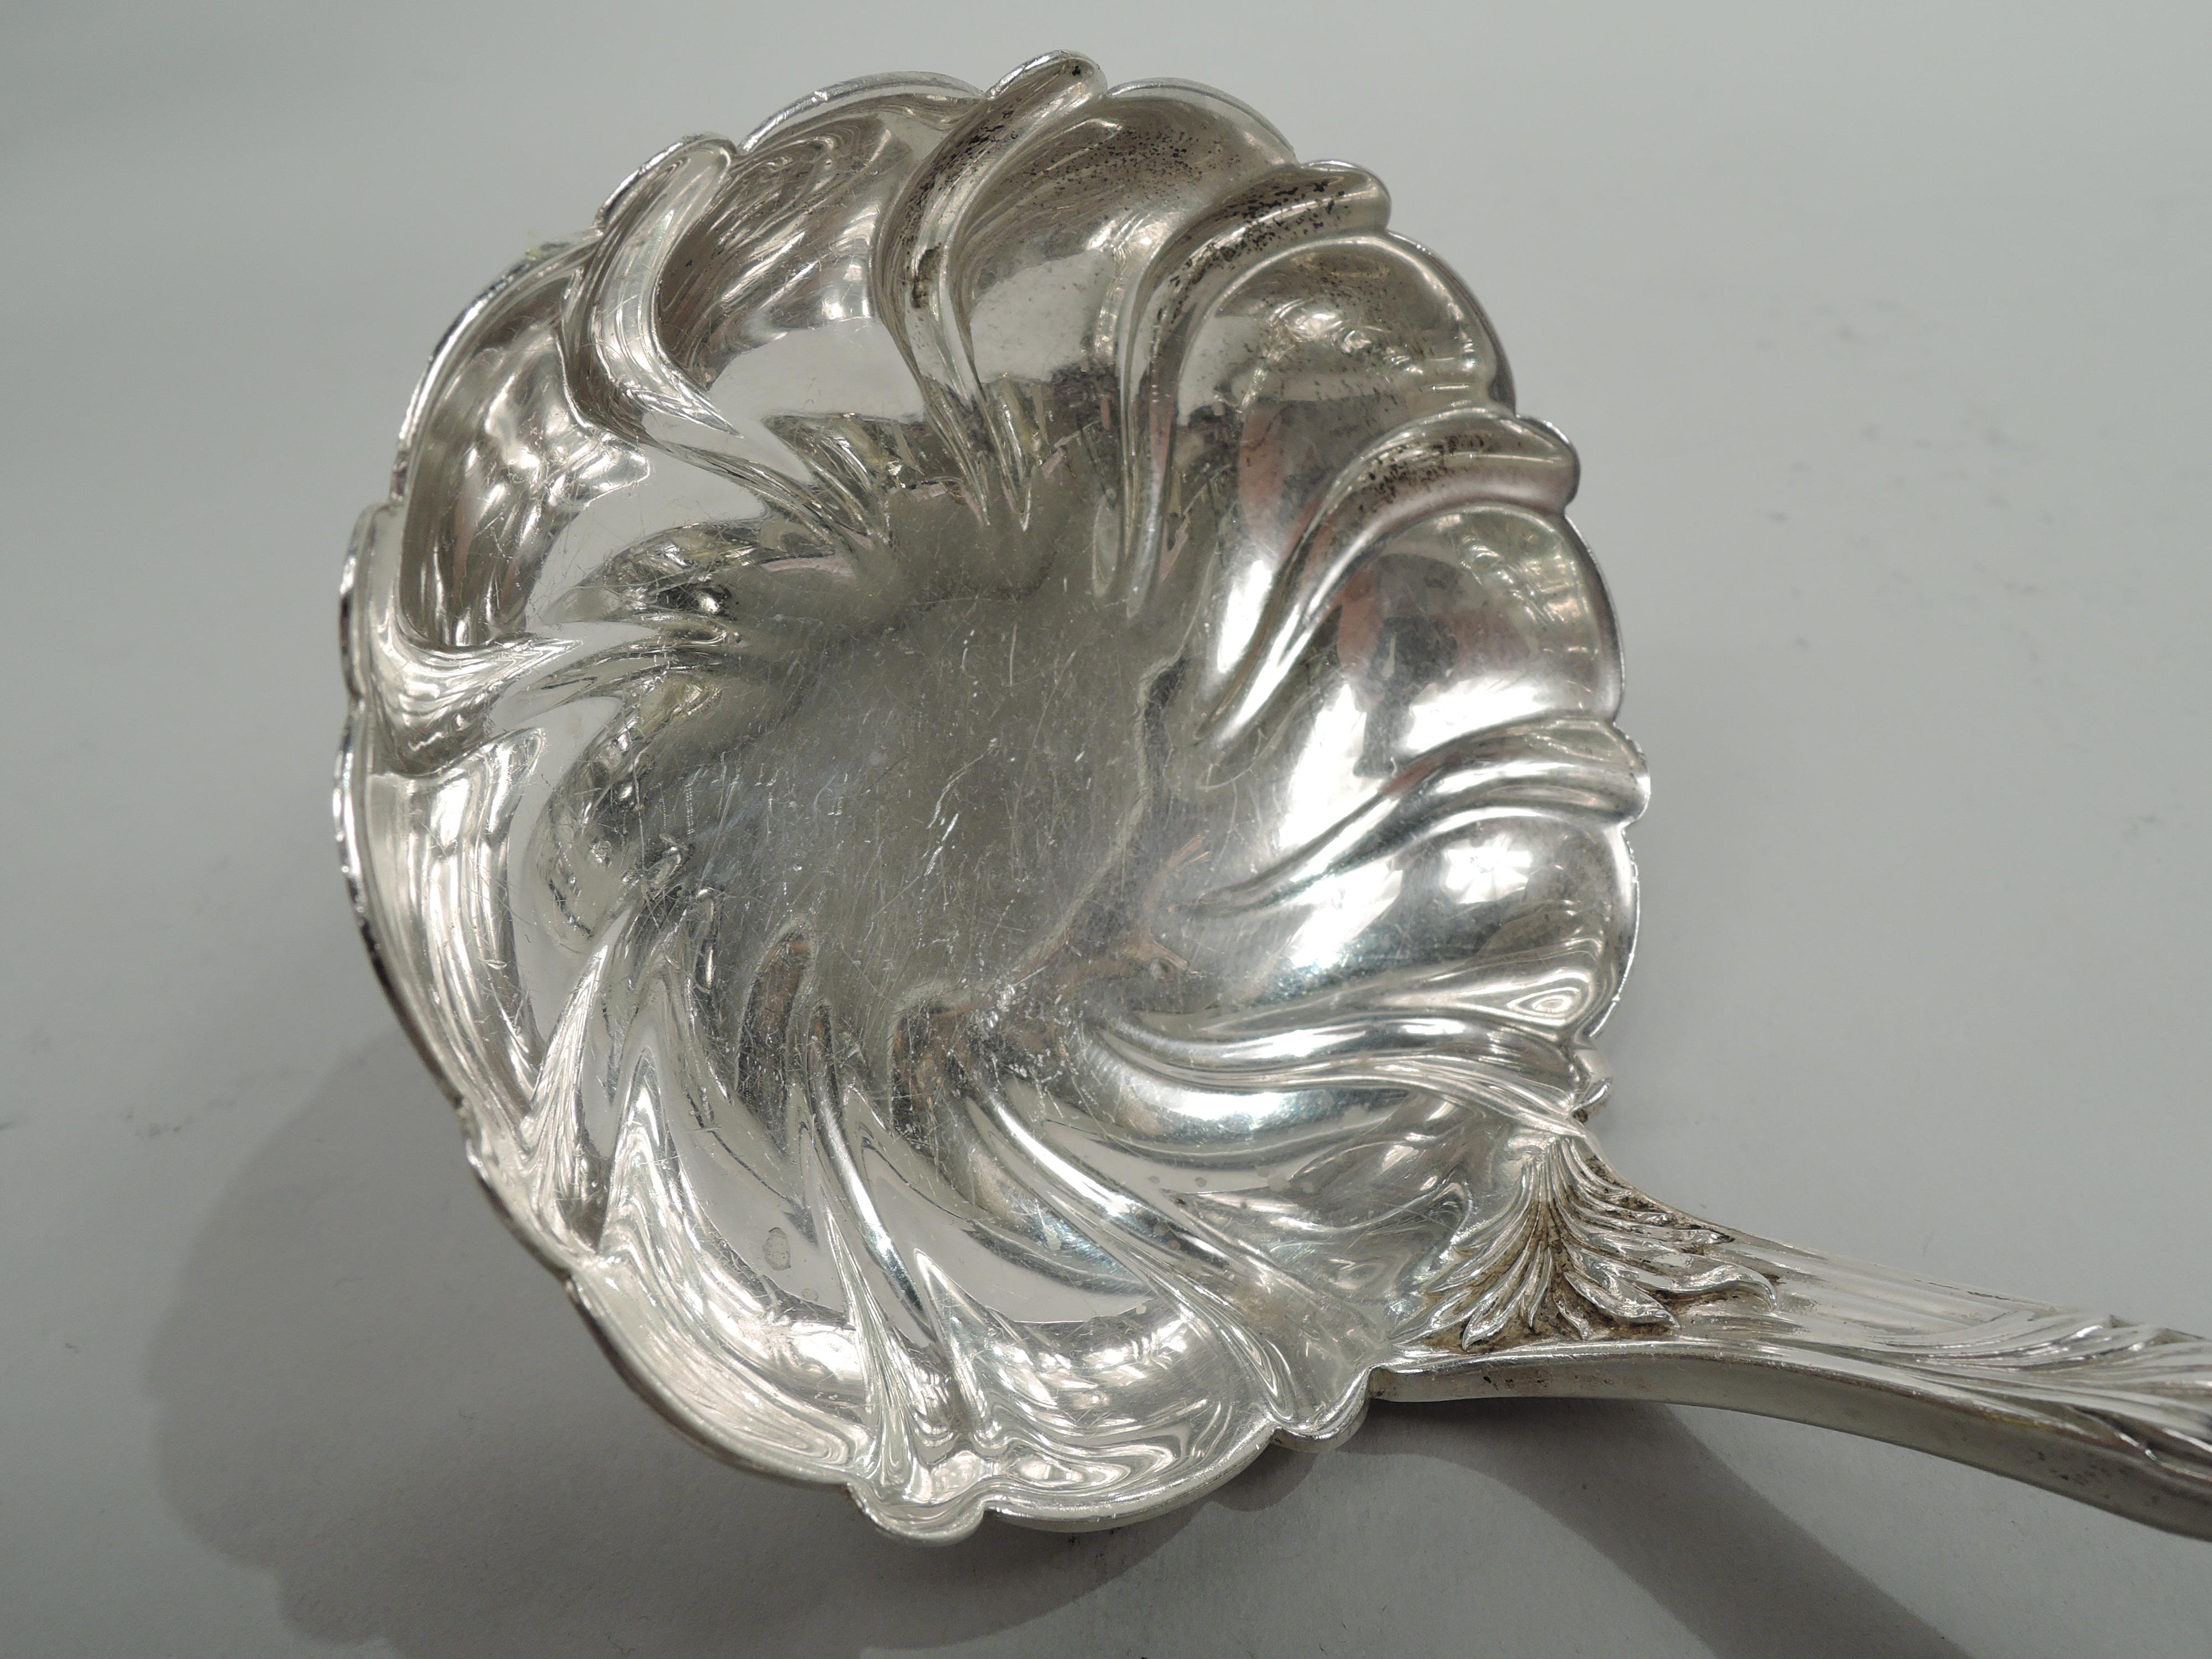 Chrysanthemum sterling silver oyster ladle. Made by Tiffany & Co. in New York, ca 1920. Round bowl with twisted fluting and curved and reeded stem with dense entwined and wraparound leaves embedded with flower heads; large flower head at terminal. A